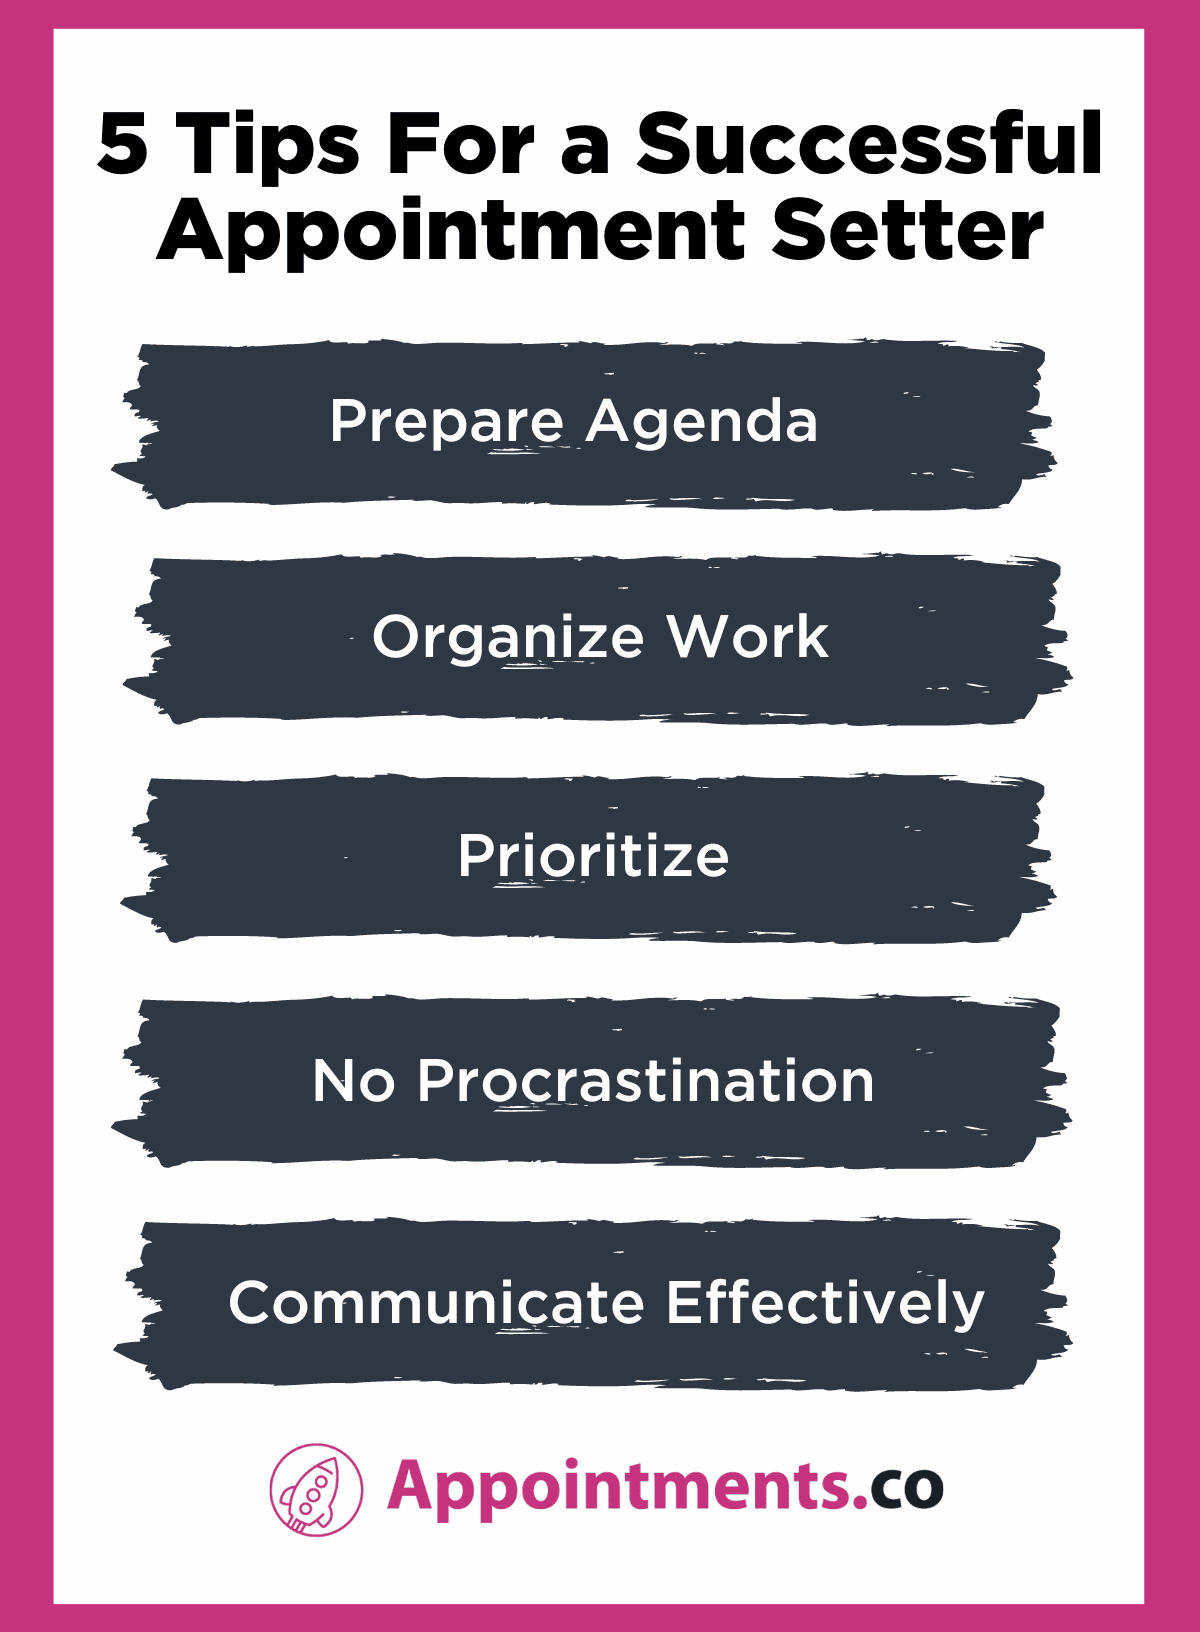 5 Tips for a Successful Appointment Setter